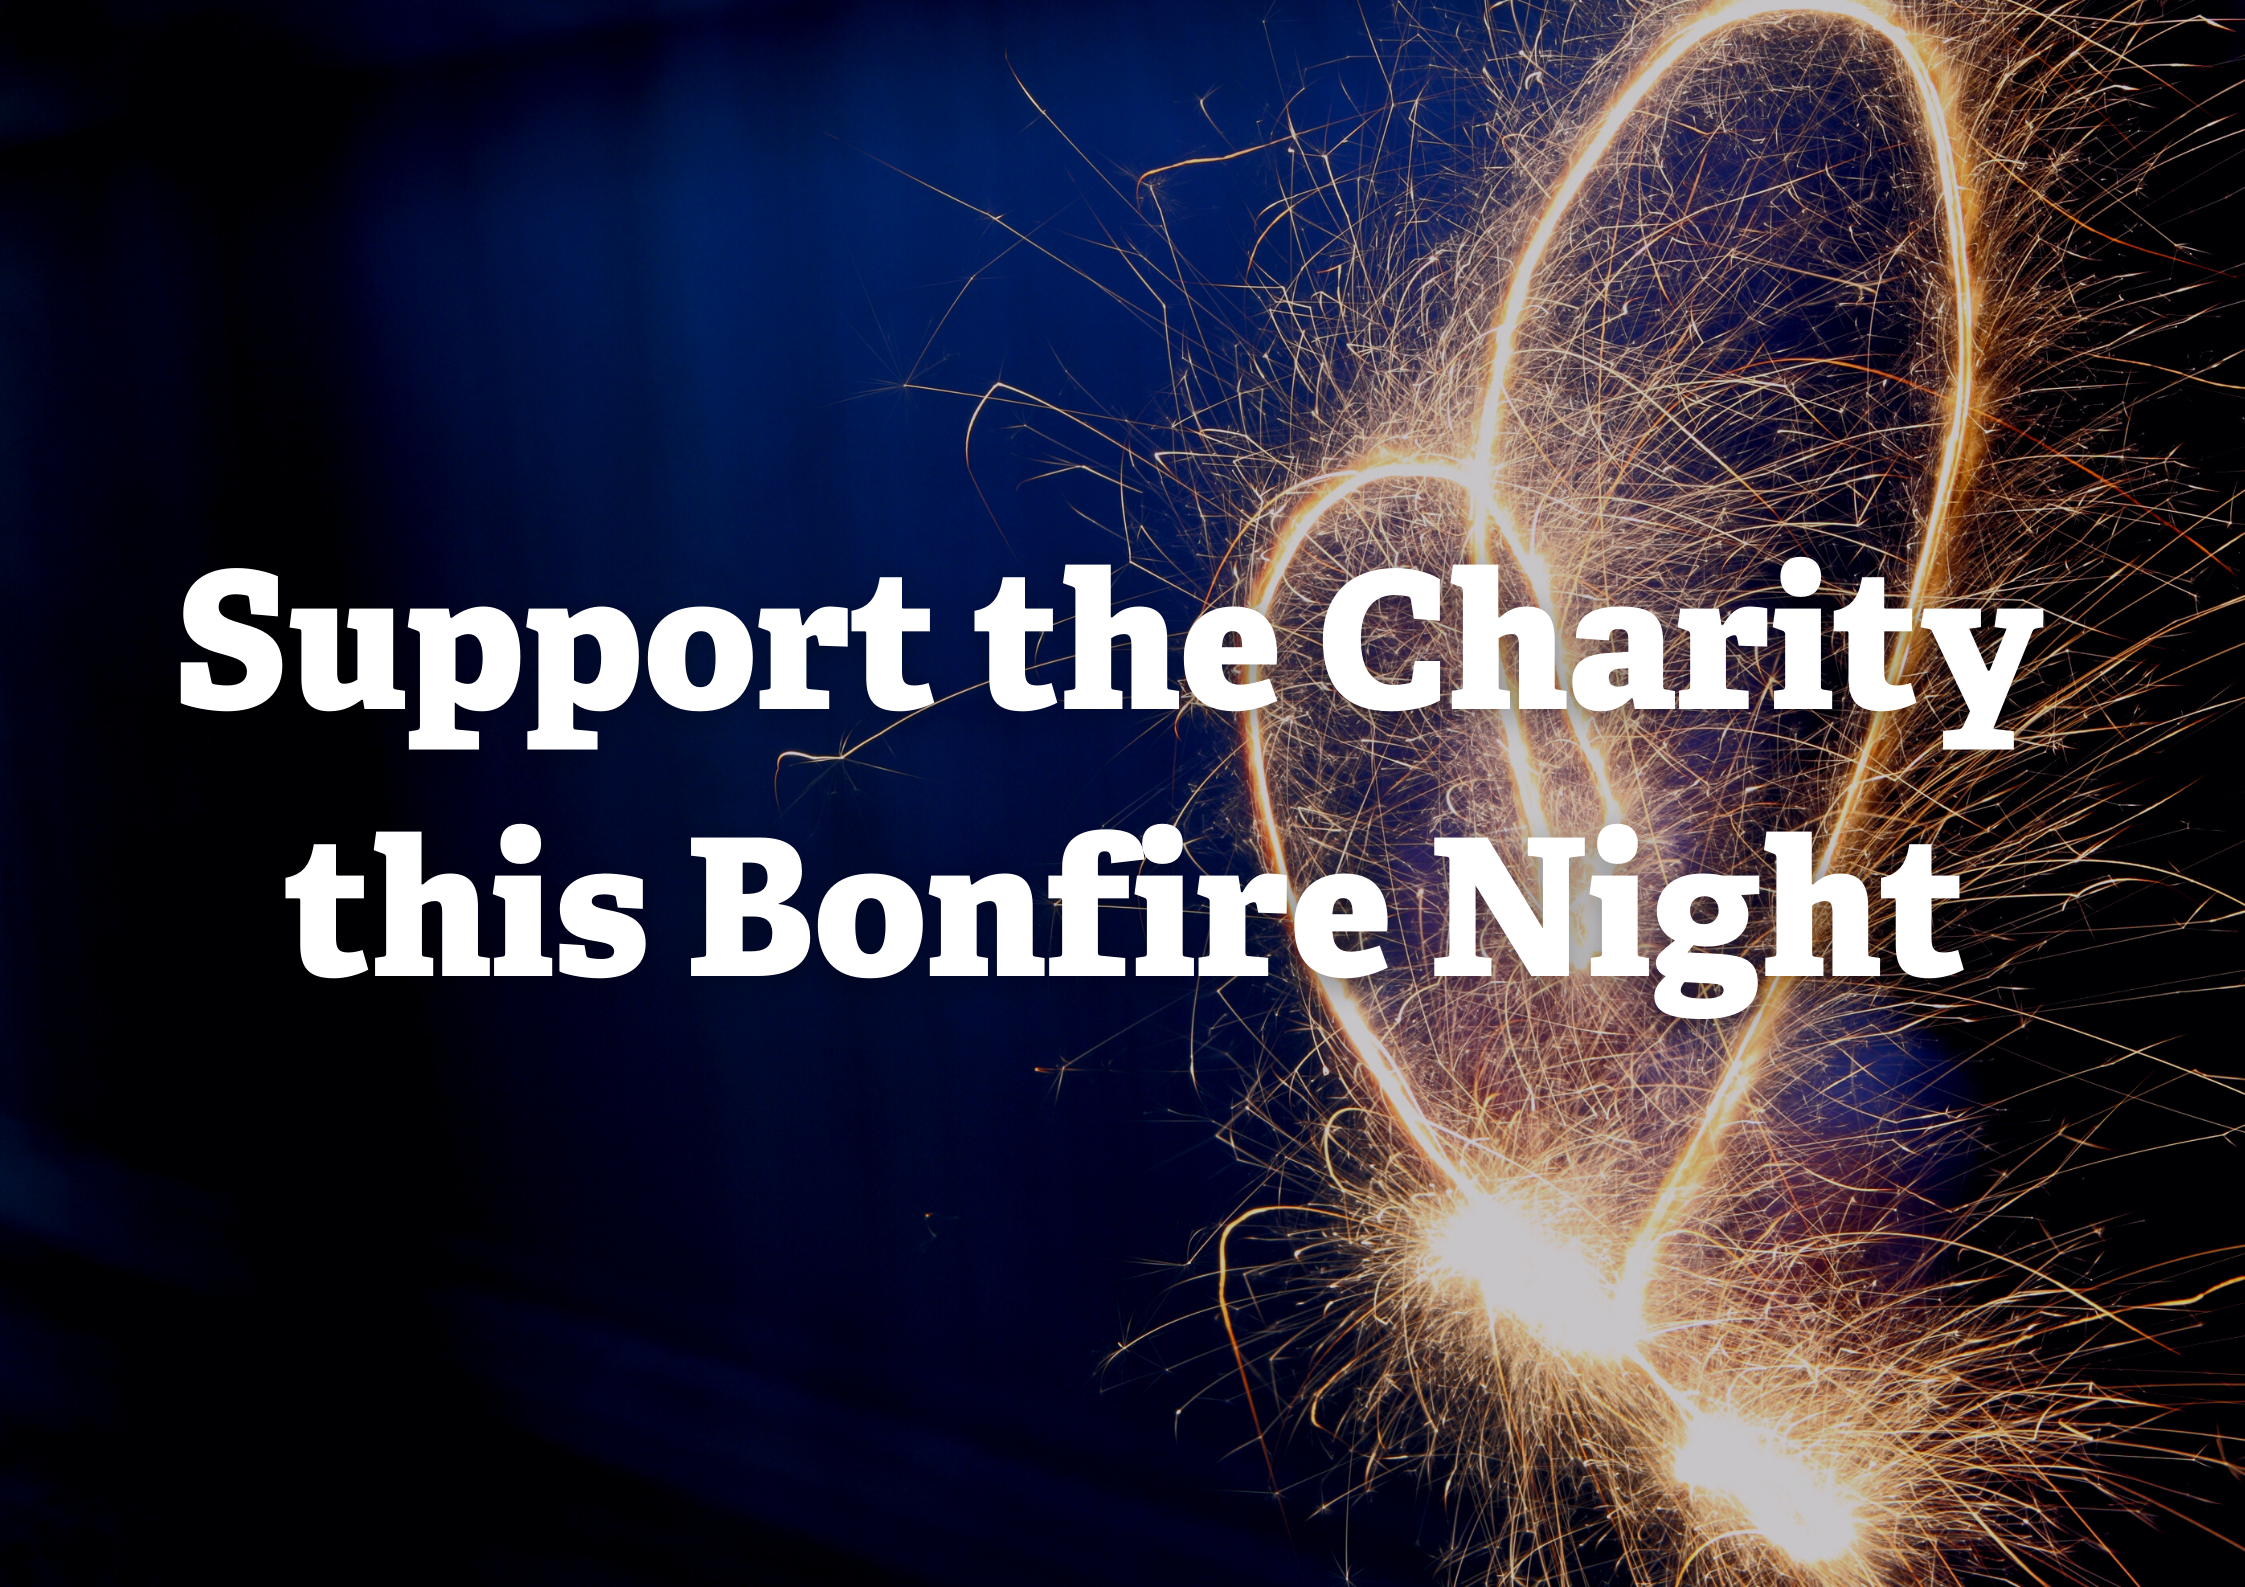 Ways to support the Charity this Bonfire Night